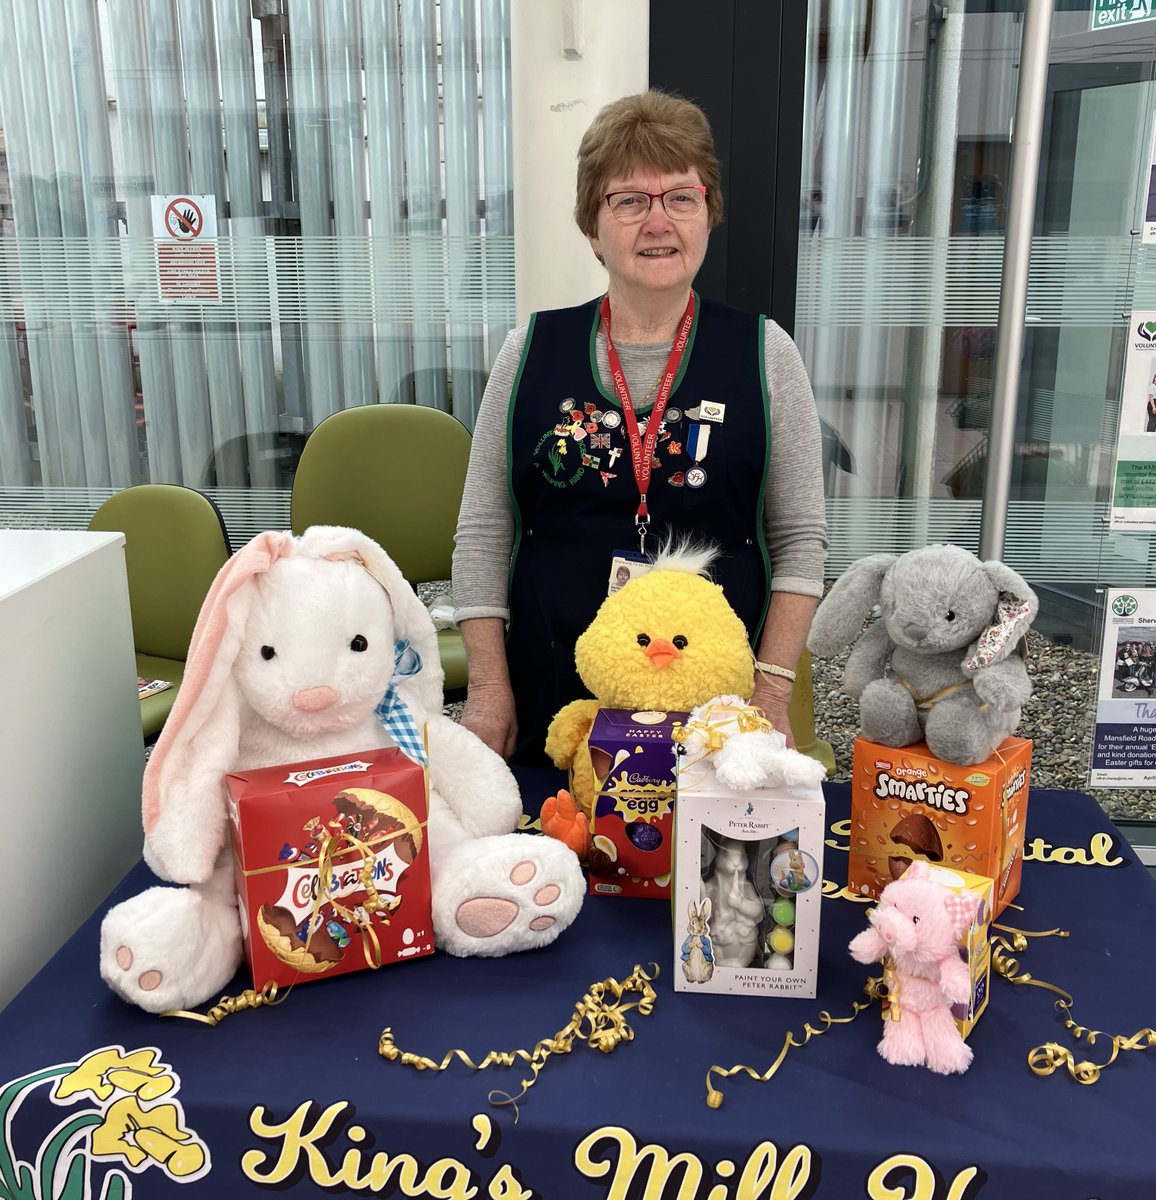 Our volunteer fundraisers have an Easter raffle in the KTC today. 50p a ticket to win one of these lovely prizes. The raffle will be drawn at 2pm today 🐥🐰🥚 @SFHFT @SFH_CSTO @SFHImprovement @SFH_PeopleHR @SfhWard25 @JoyWils72609355 @jothornley22